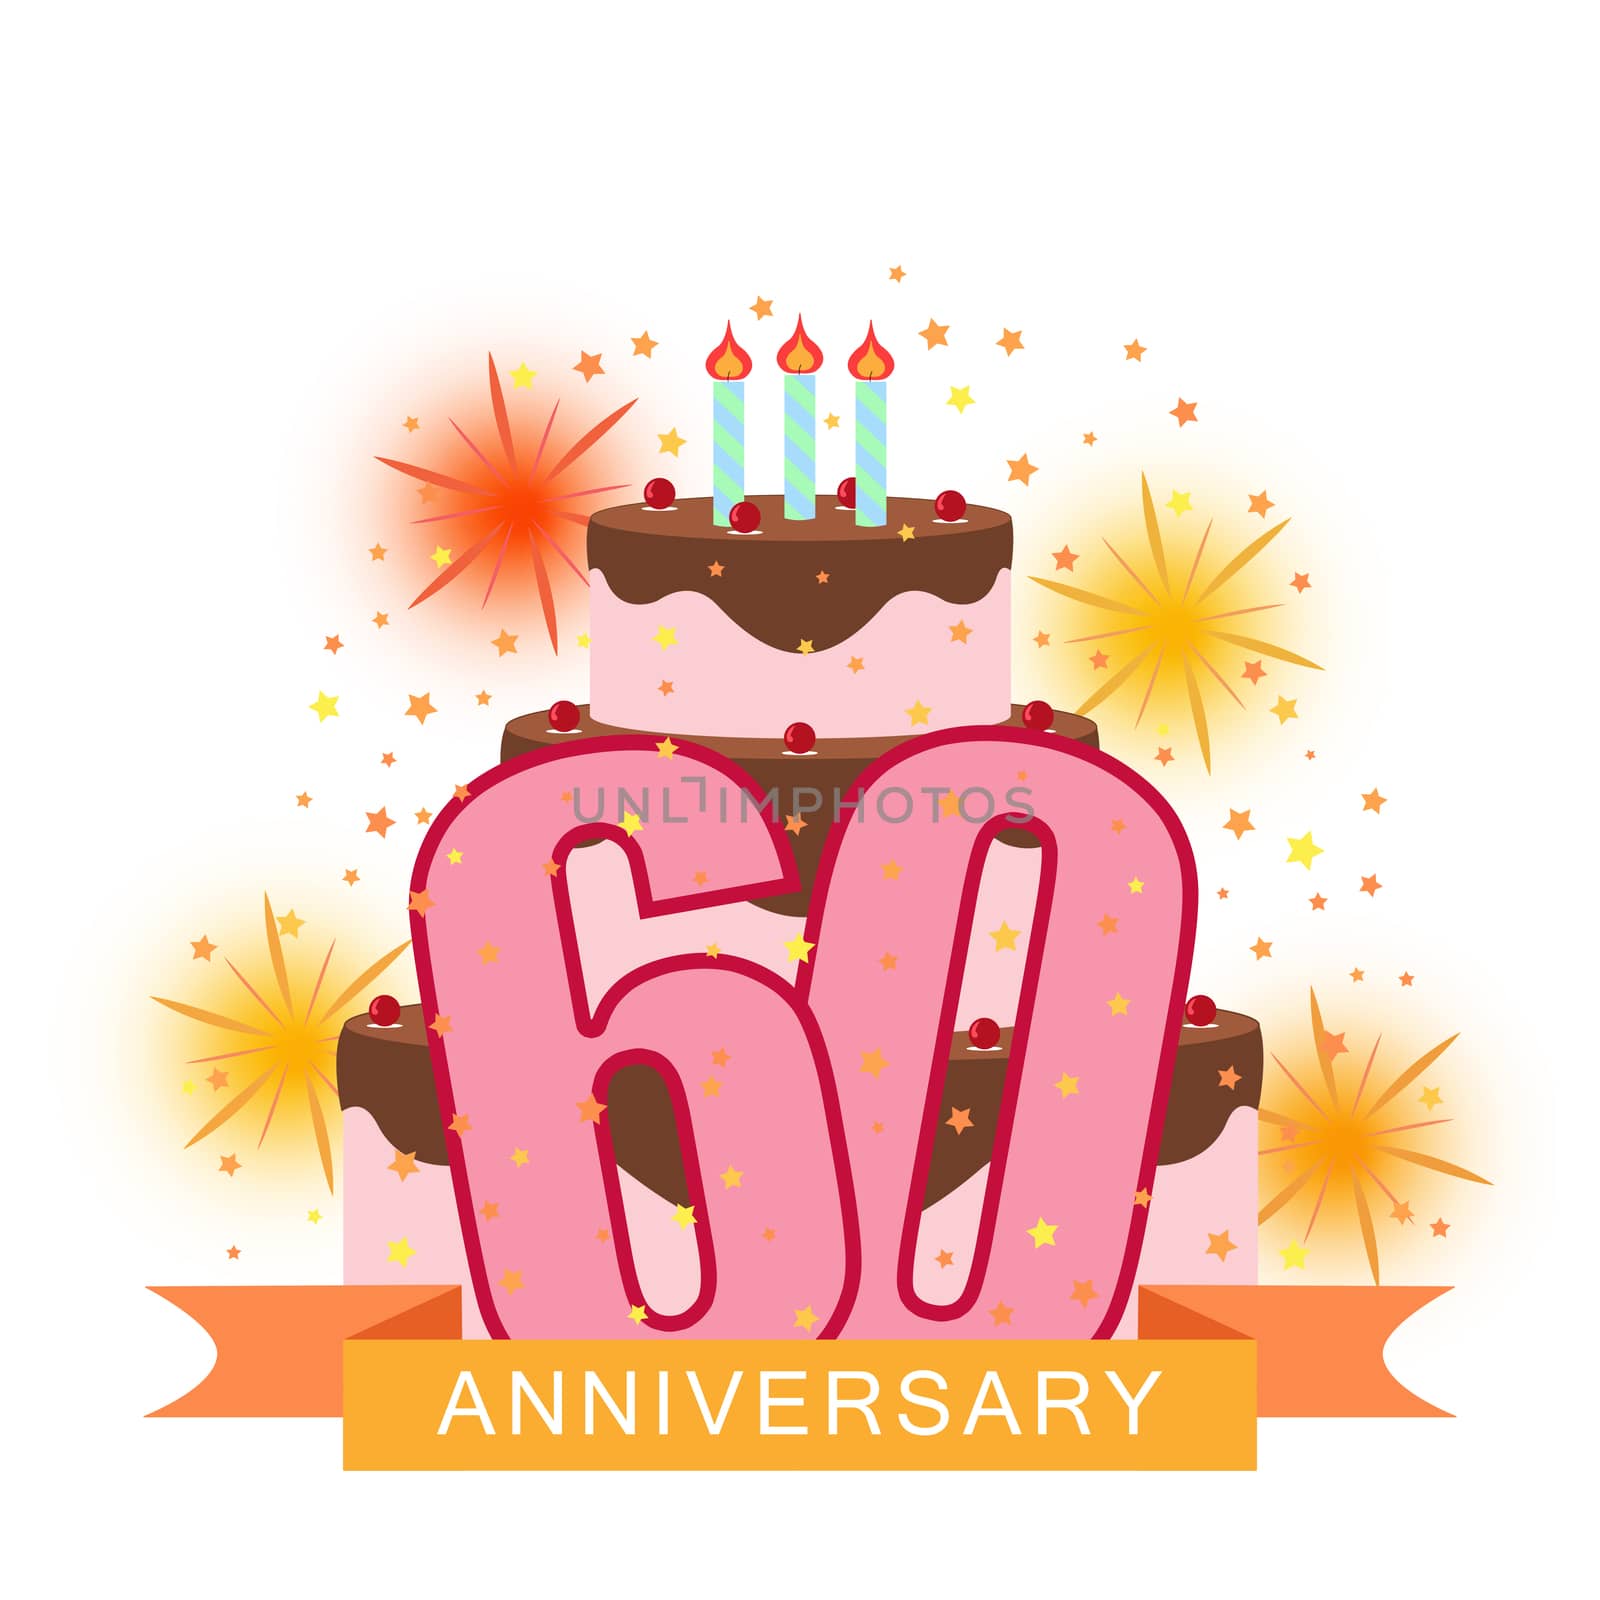 Illustrated image of the number sixty, birthday cake, fireworks and starry rain